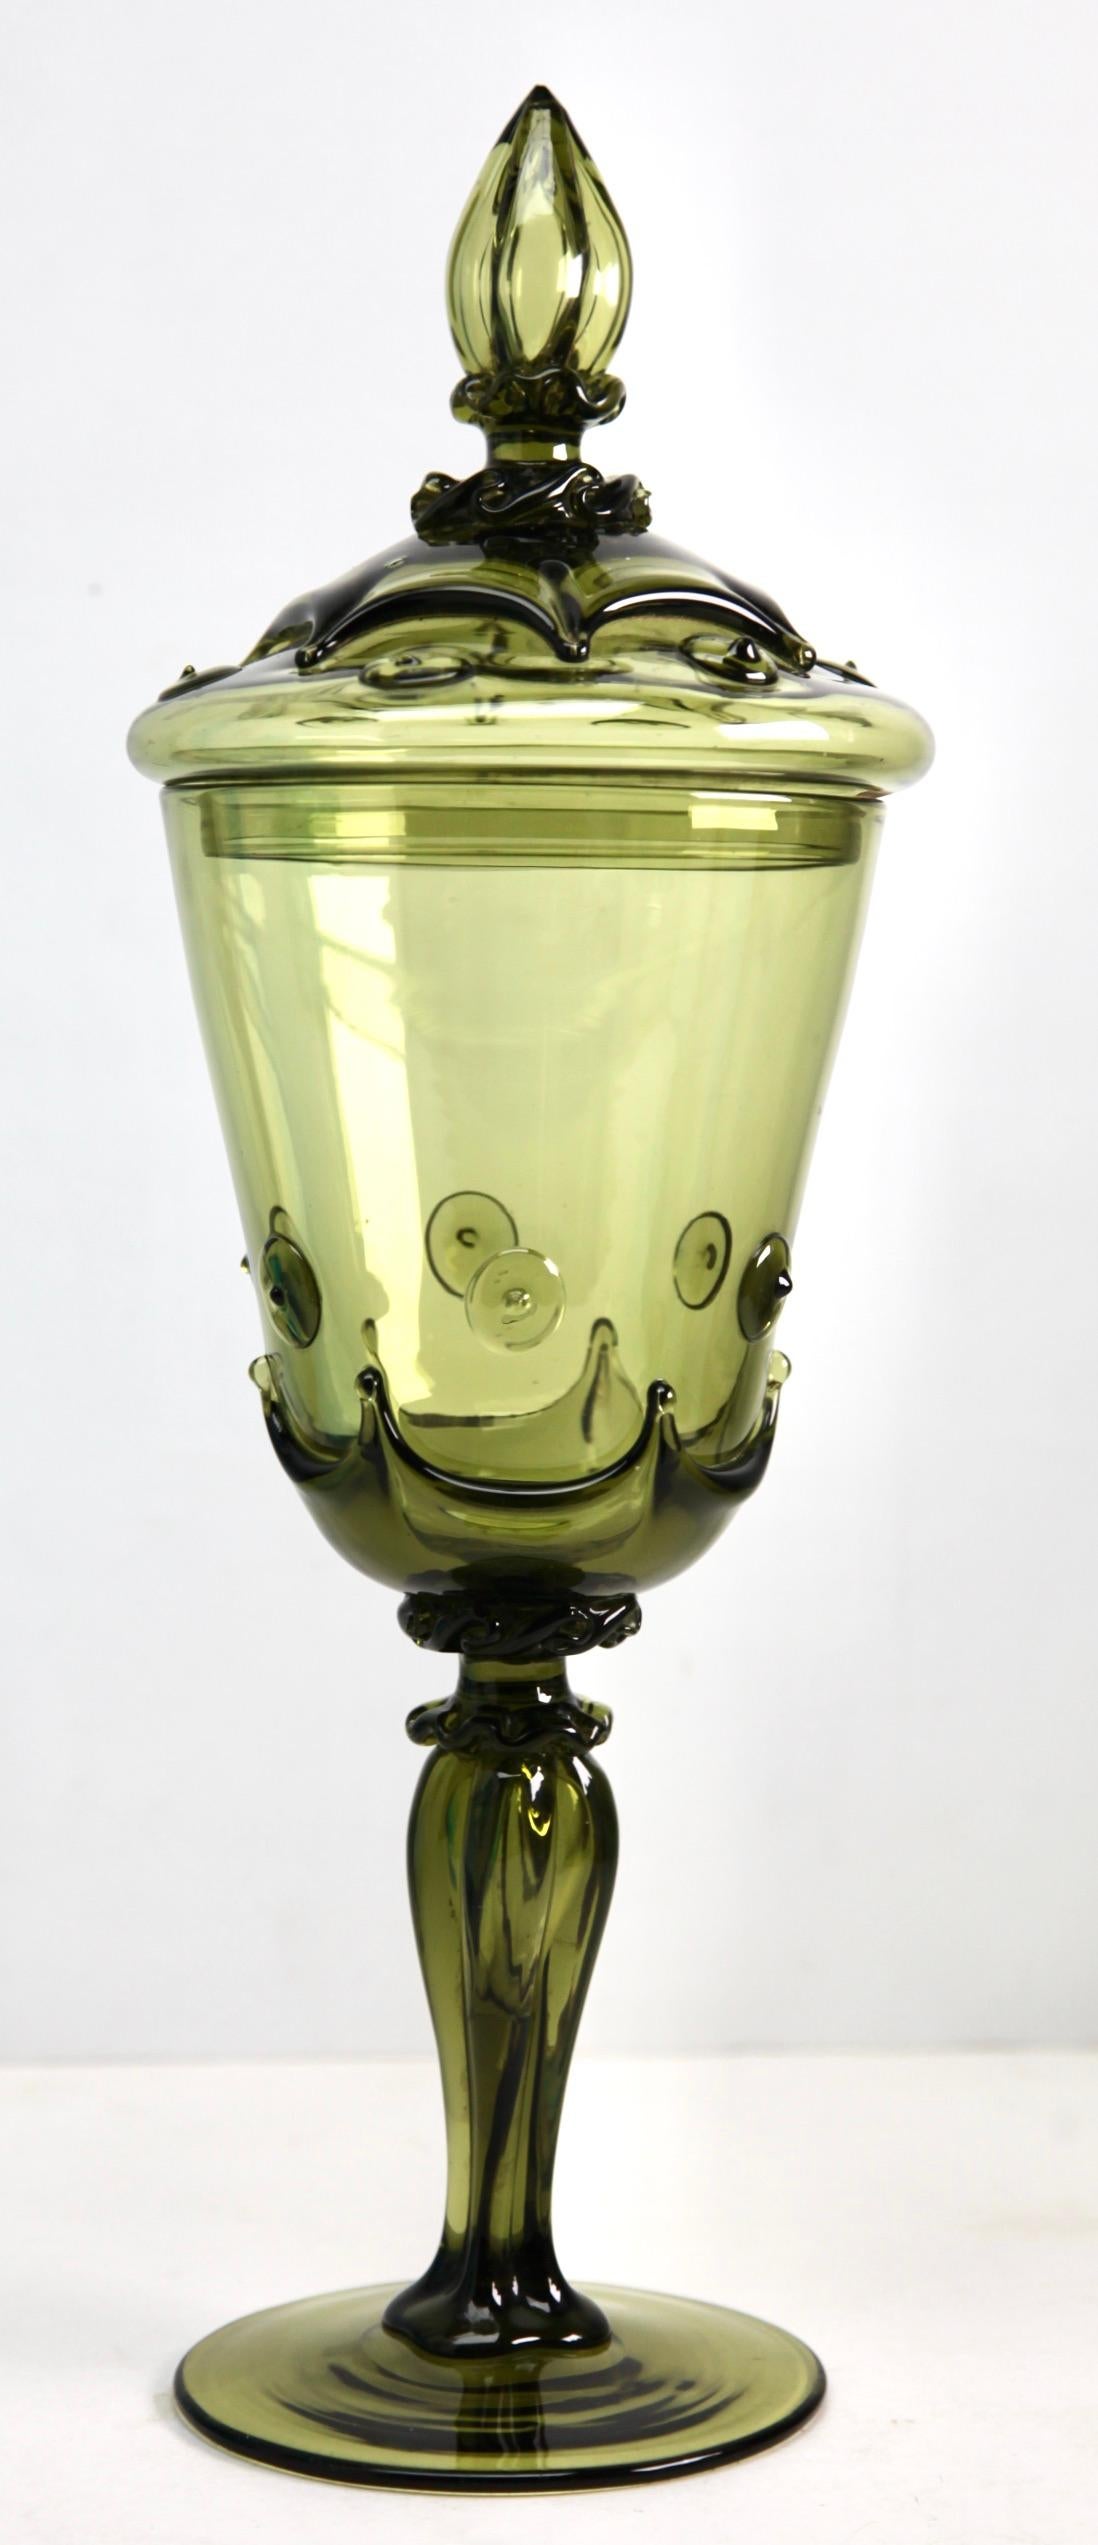 Bohemian glass footed jar, circa 1950s.
This is a real collector’s piece that should not miss in the collection.
This piece is in excellent condition.
Looks simply stunning.

Dimensions:
Height 42 cm, 16.53 inch
Width 15 cm, 5.90